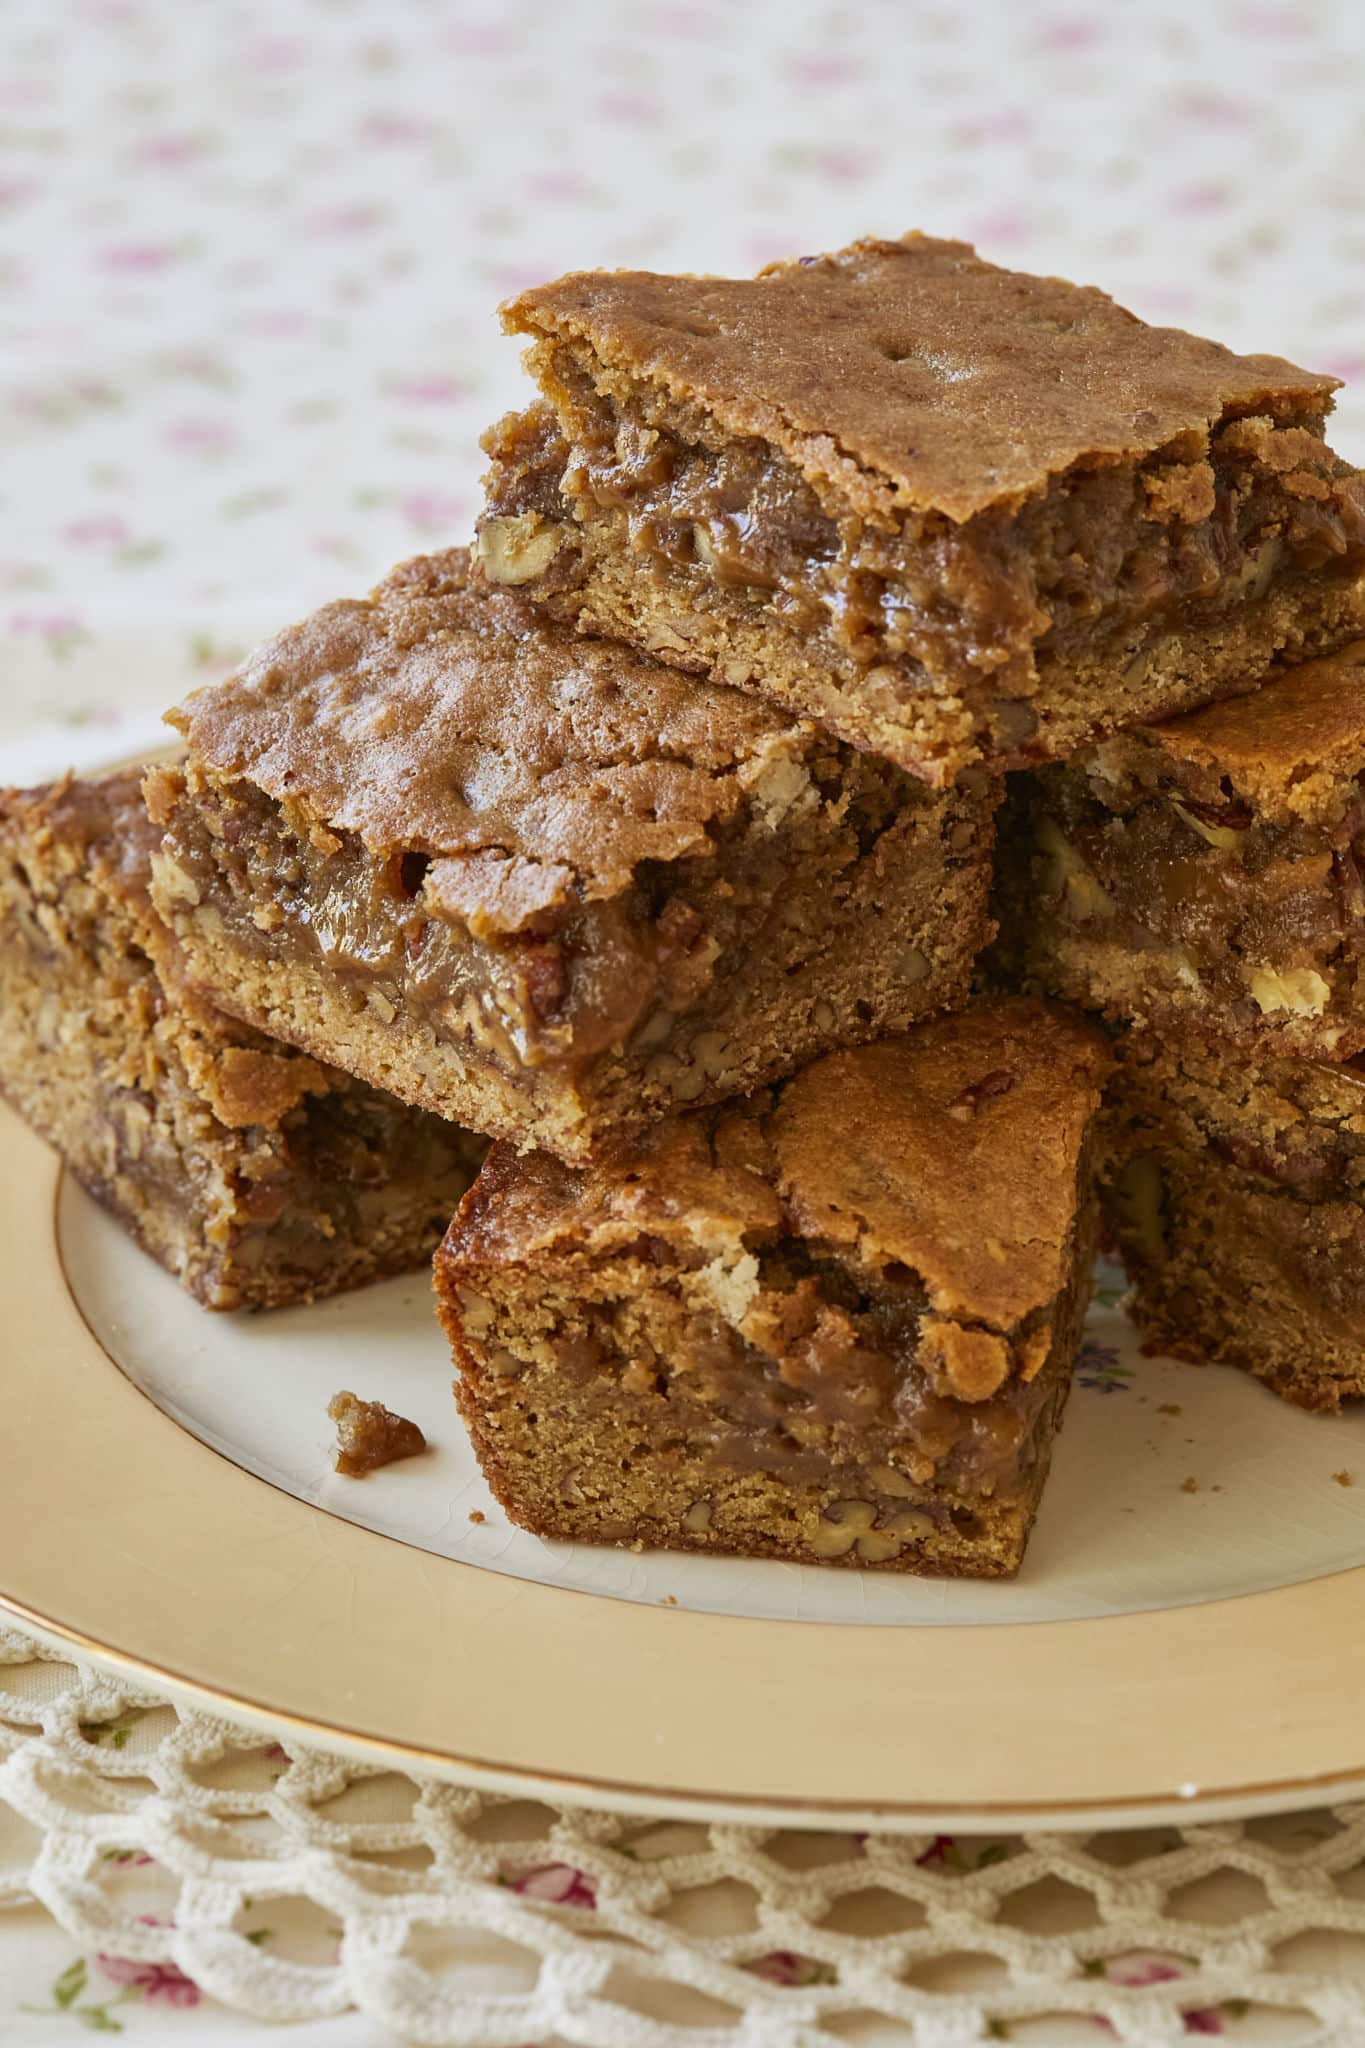 A batch of maple blondies are stacked on each other and a serving dish. There are toasted pecans in the blondies.